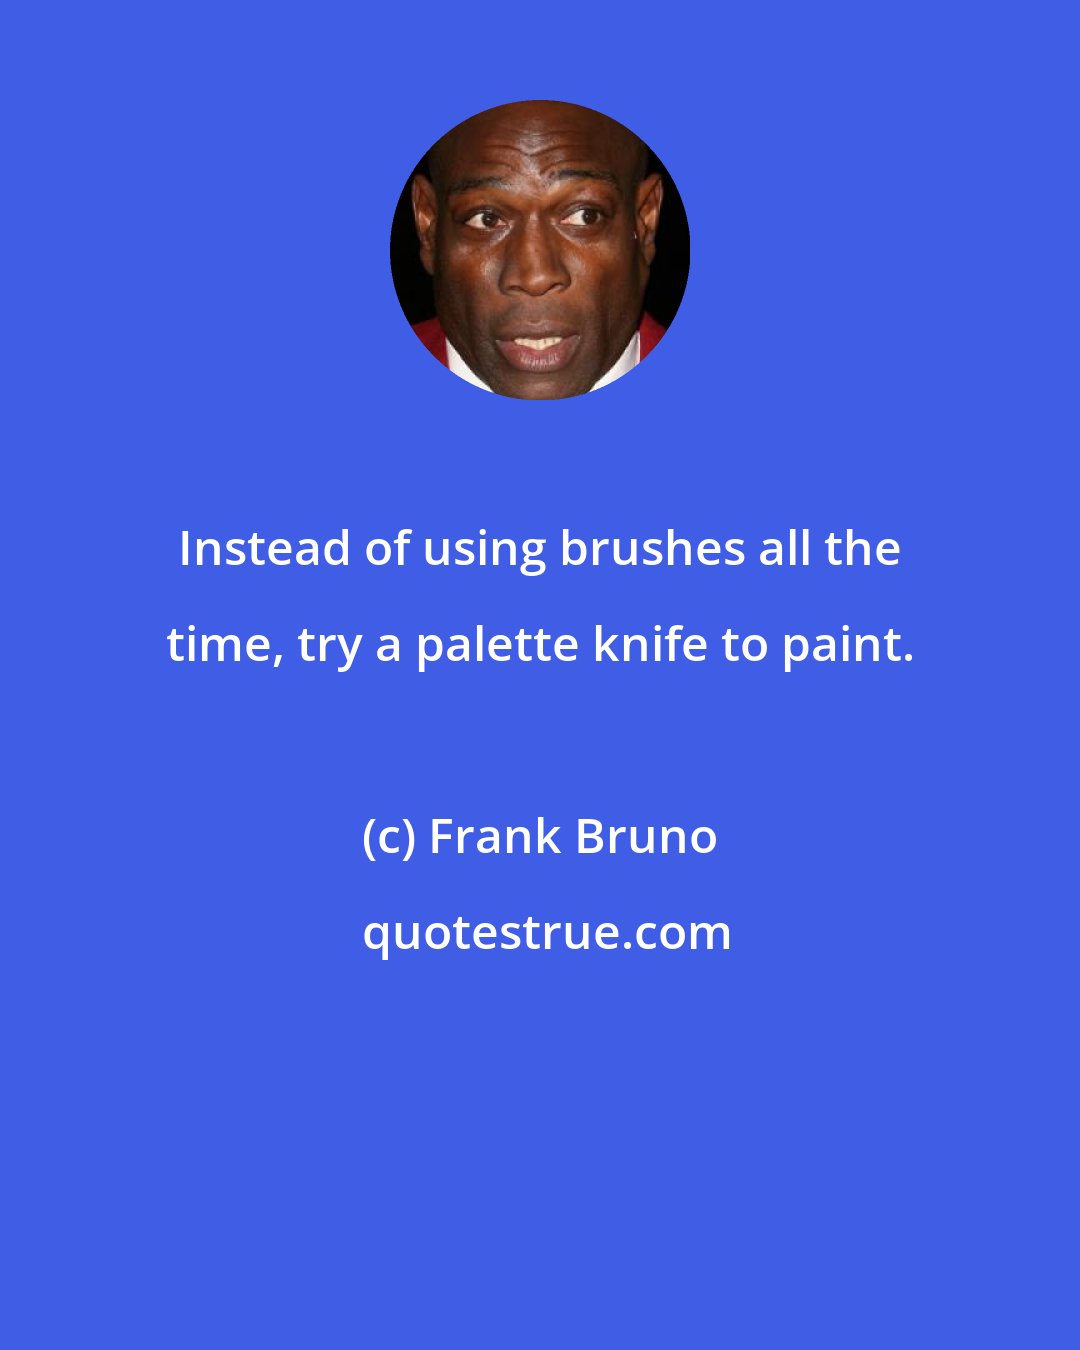 Frank Bruno: Instead of using brushes all the time, try a palette knife to paint.